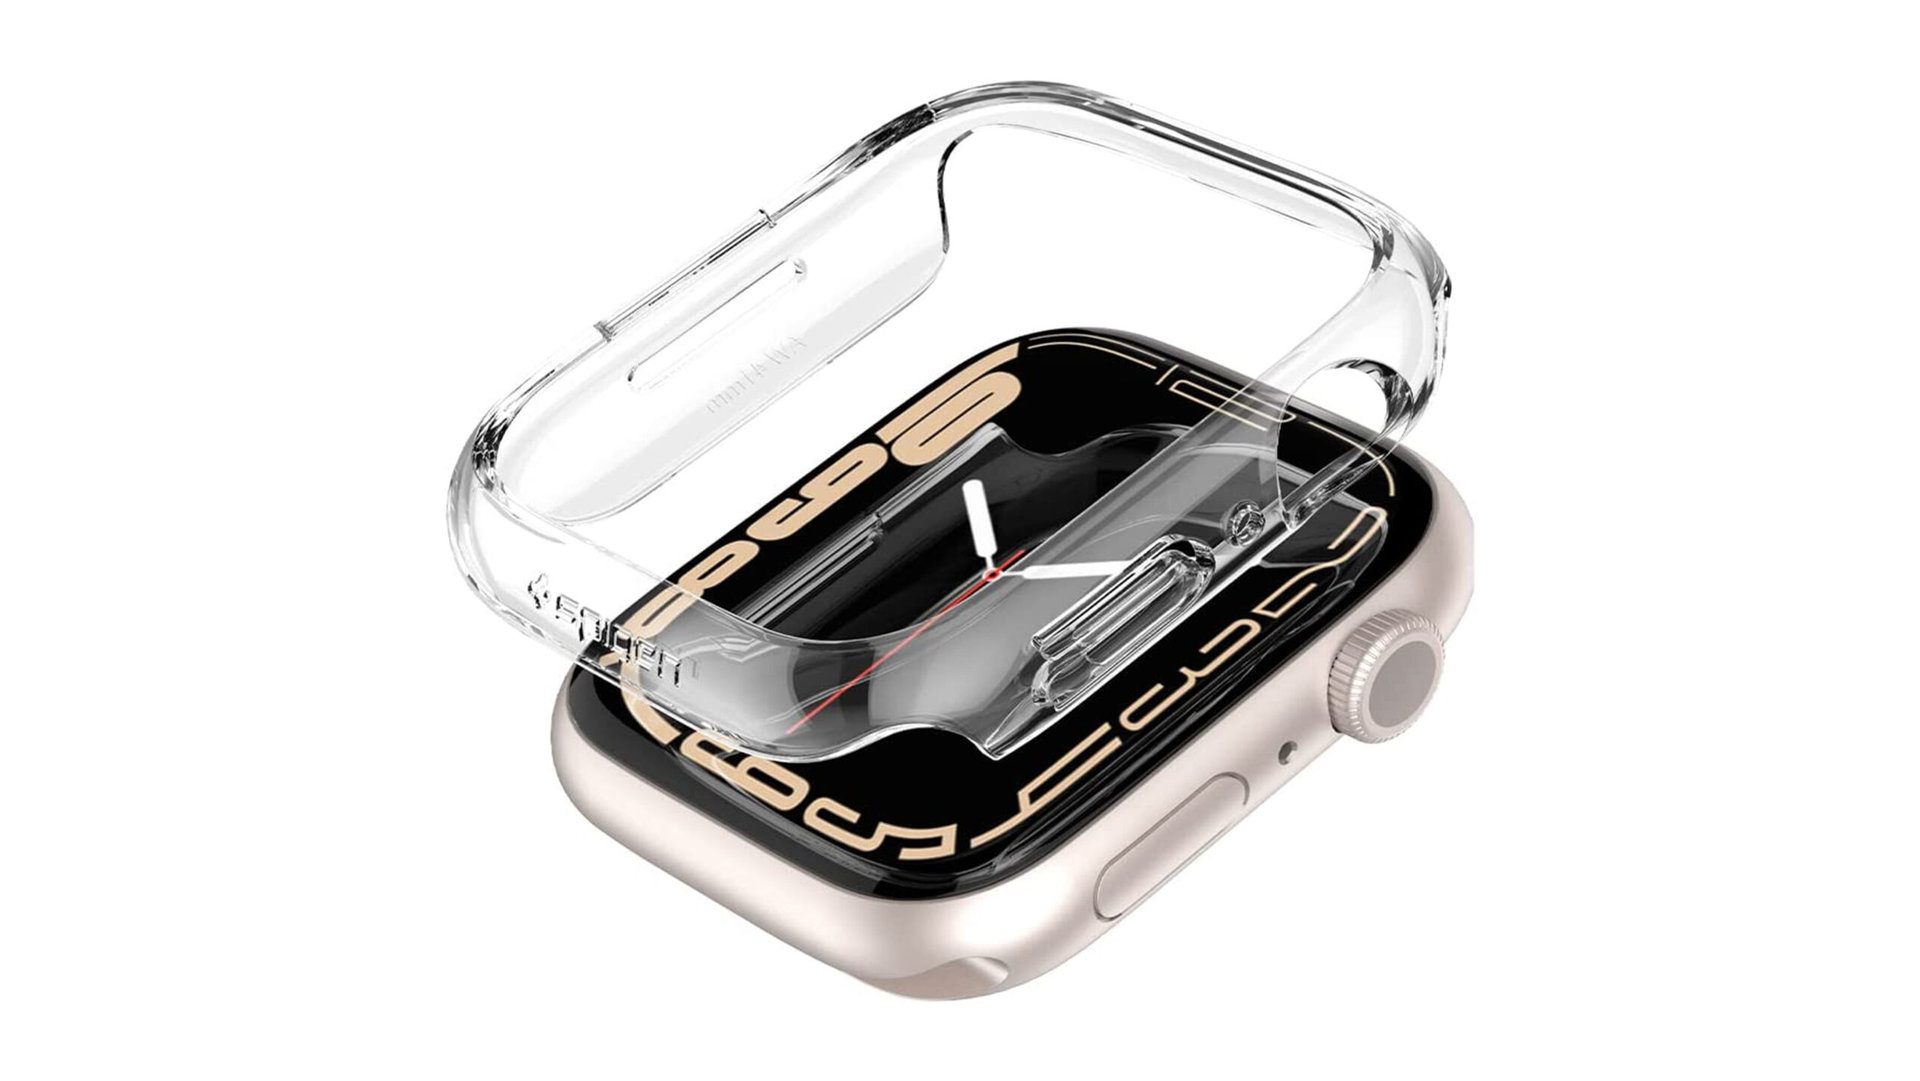 The Spiegen Thin Fit Case for Apple Watch comes in black, transparent, and Starlight.